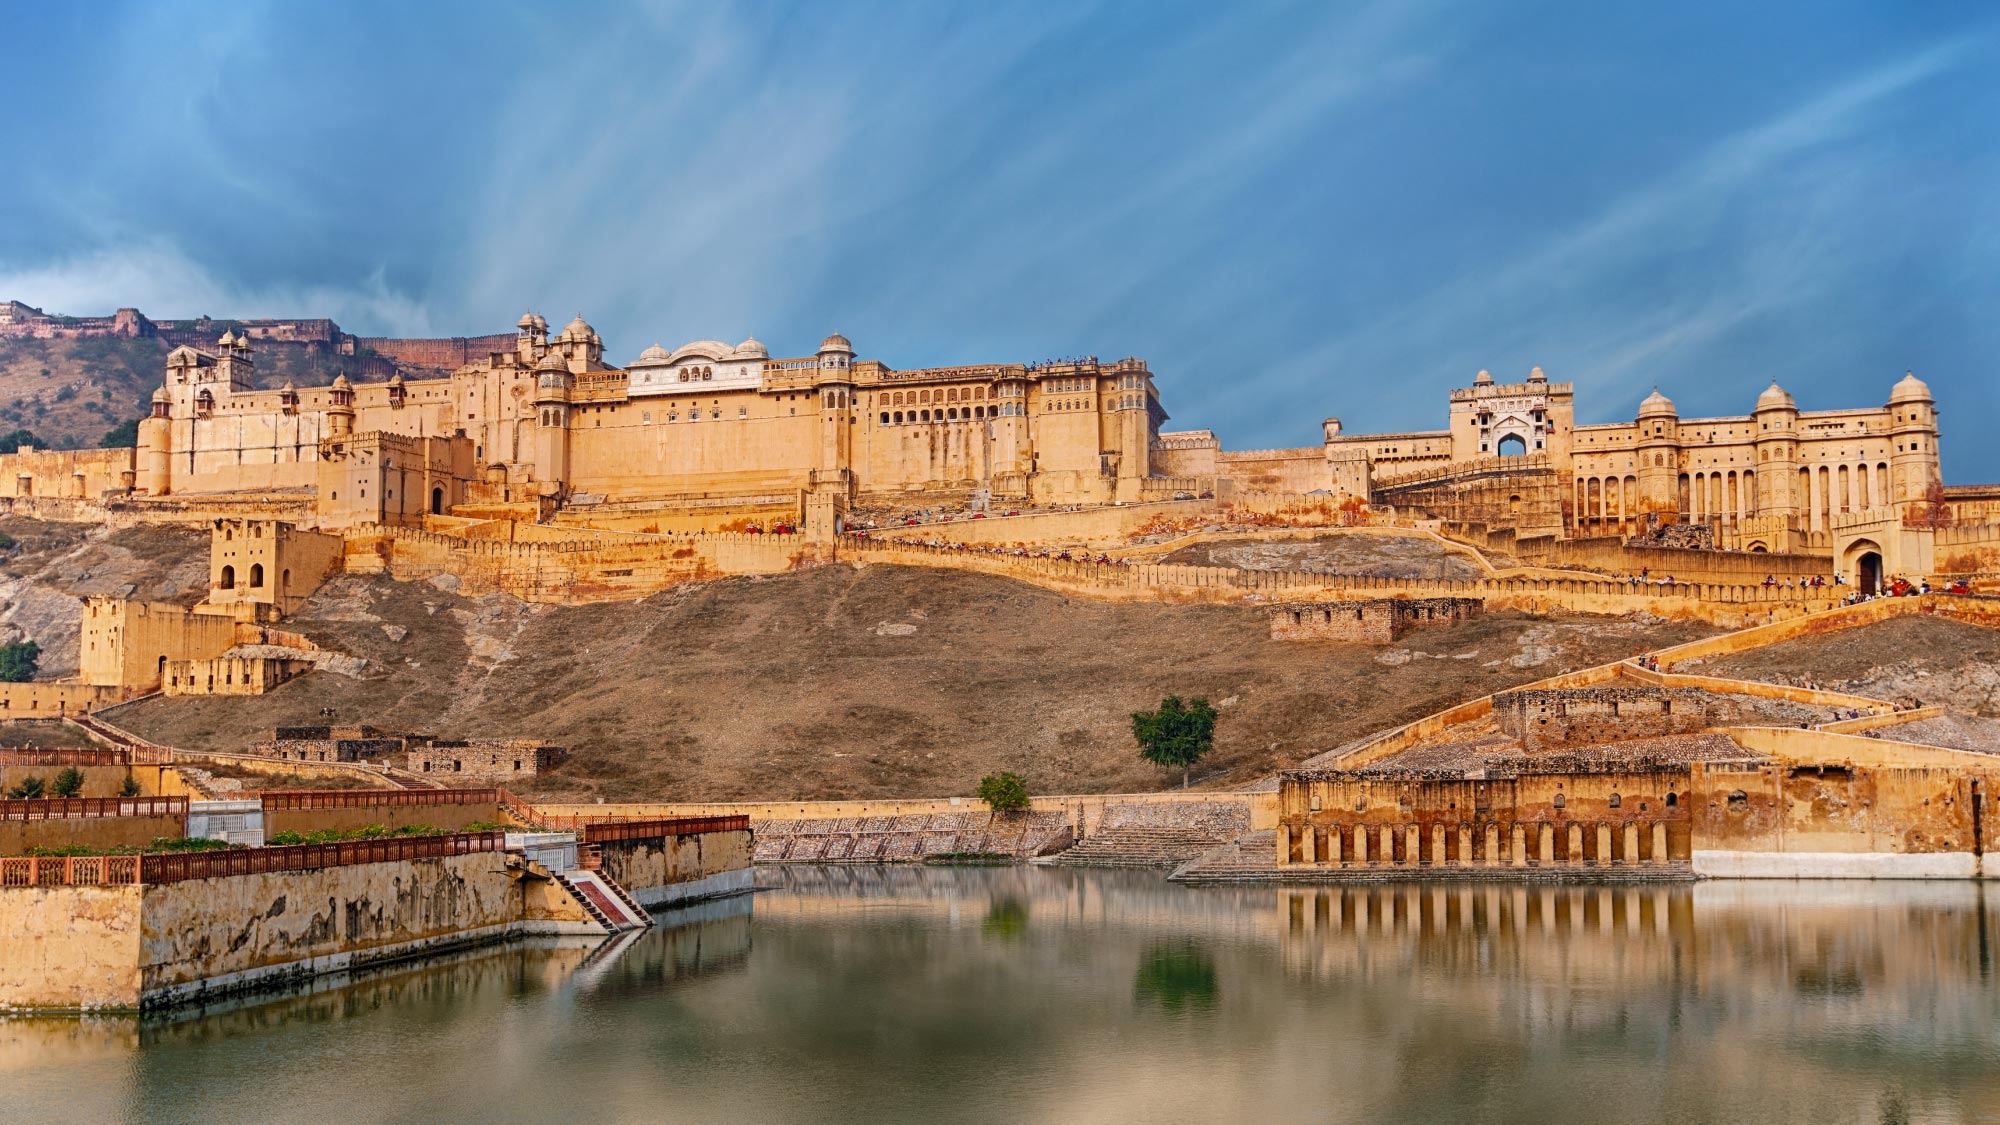 Capture the vibrant charm of Jaipur in India, a captivating stop on the journey to Australia spanning 21 countries, tailored for self-flying pilots. Immerse yourself in the rich history, colorful culture, and stunning architecture of the famed 'Pink City